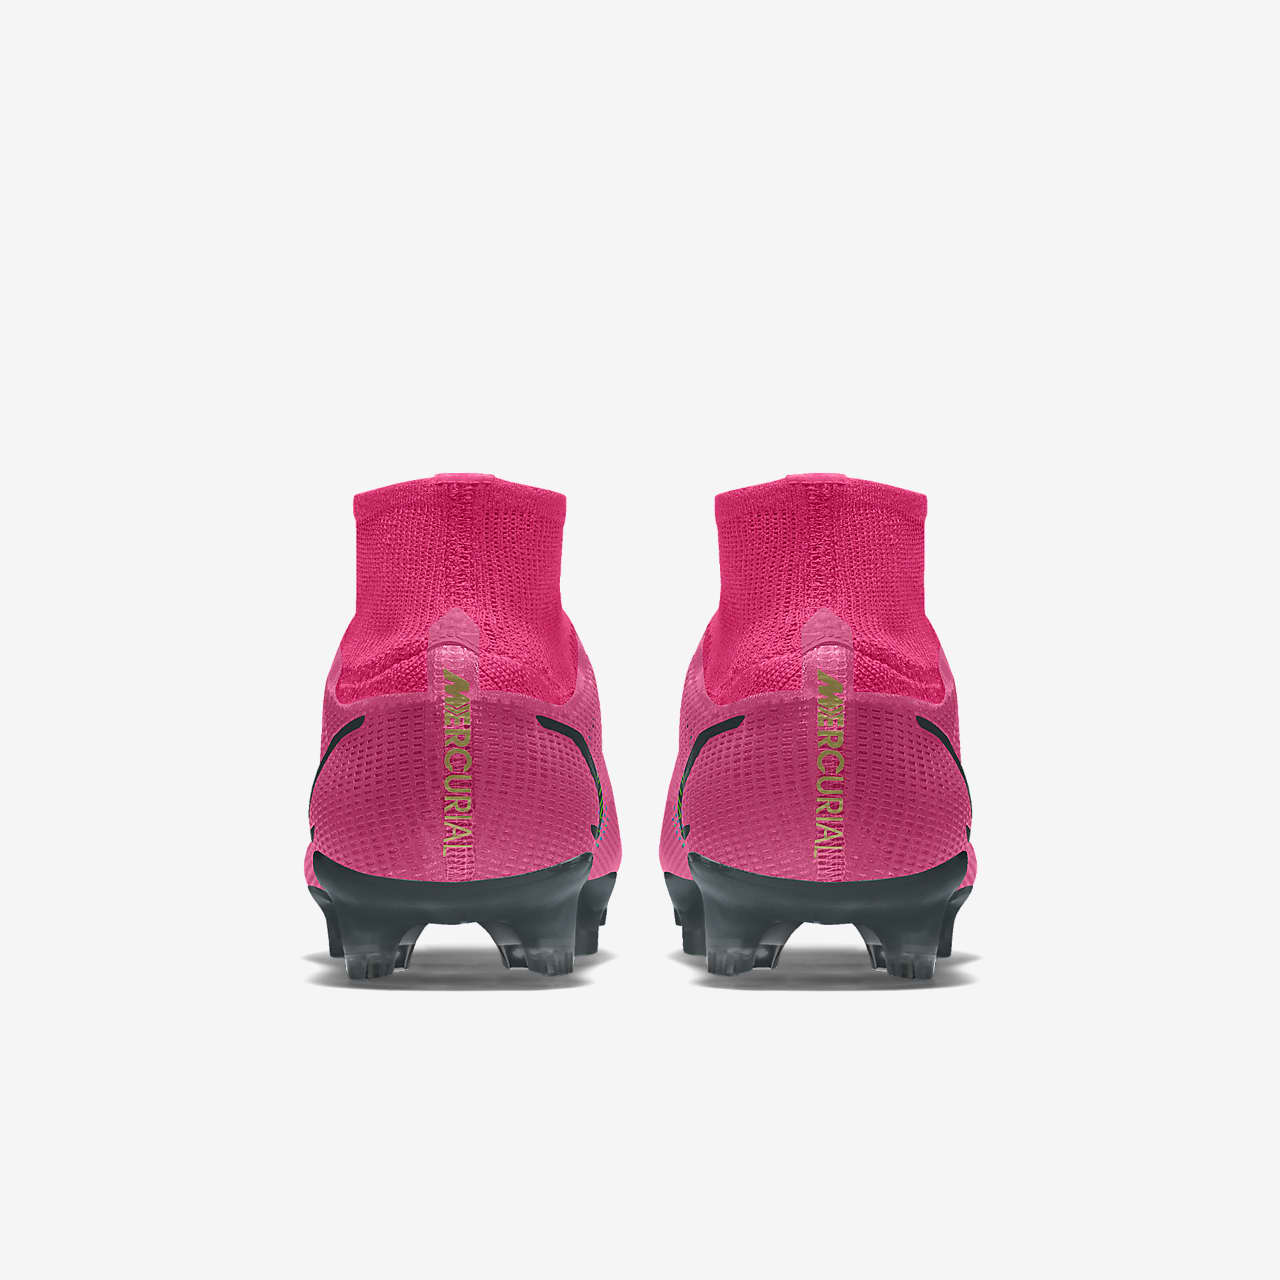 customize your own nike mercurial football boots